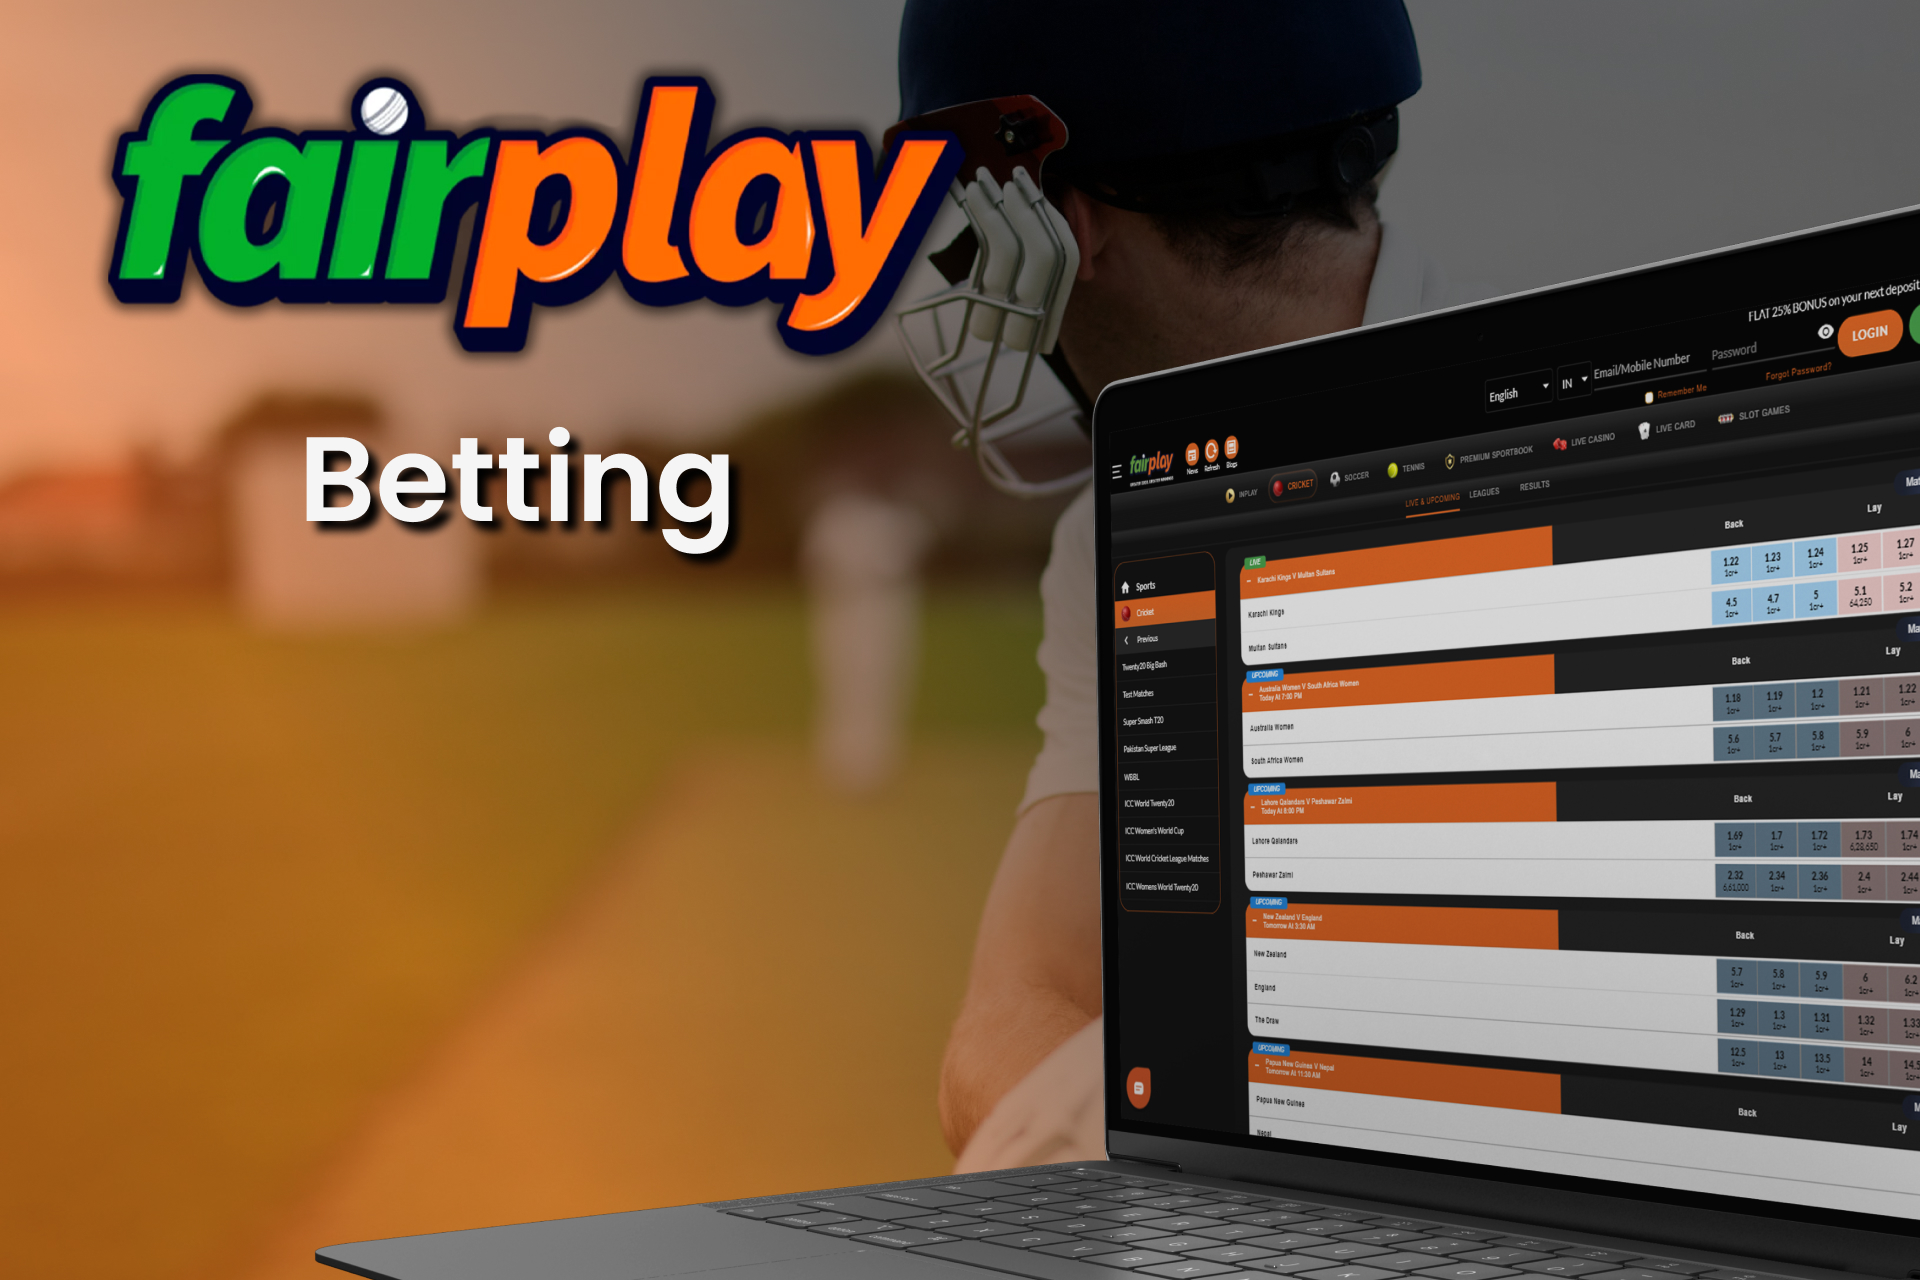 Bet on IPL with Fairplay.